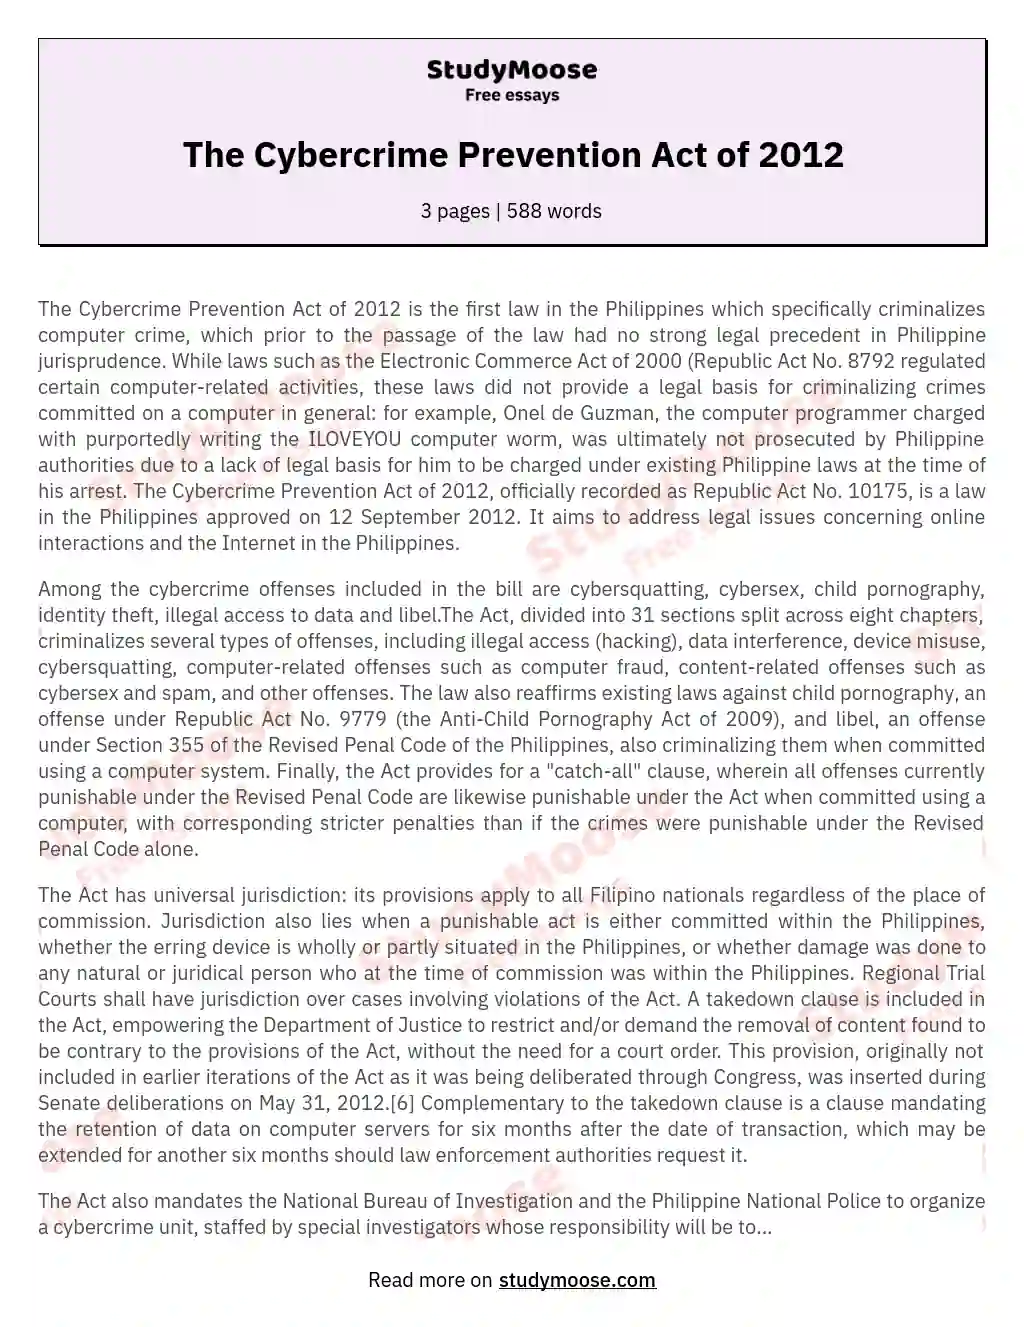 The Cybercrime Prevention Act of 2012 essay